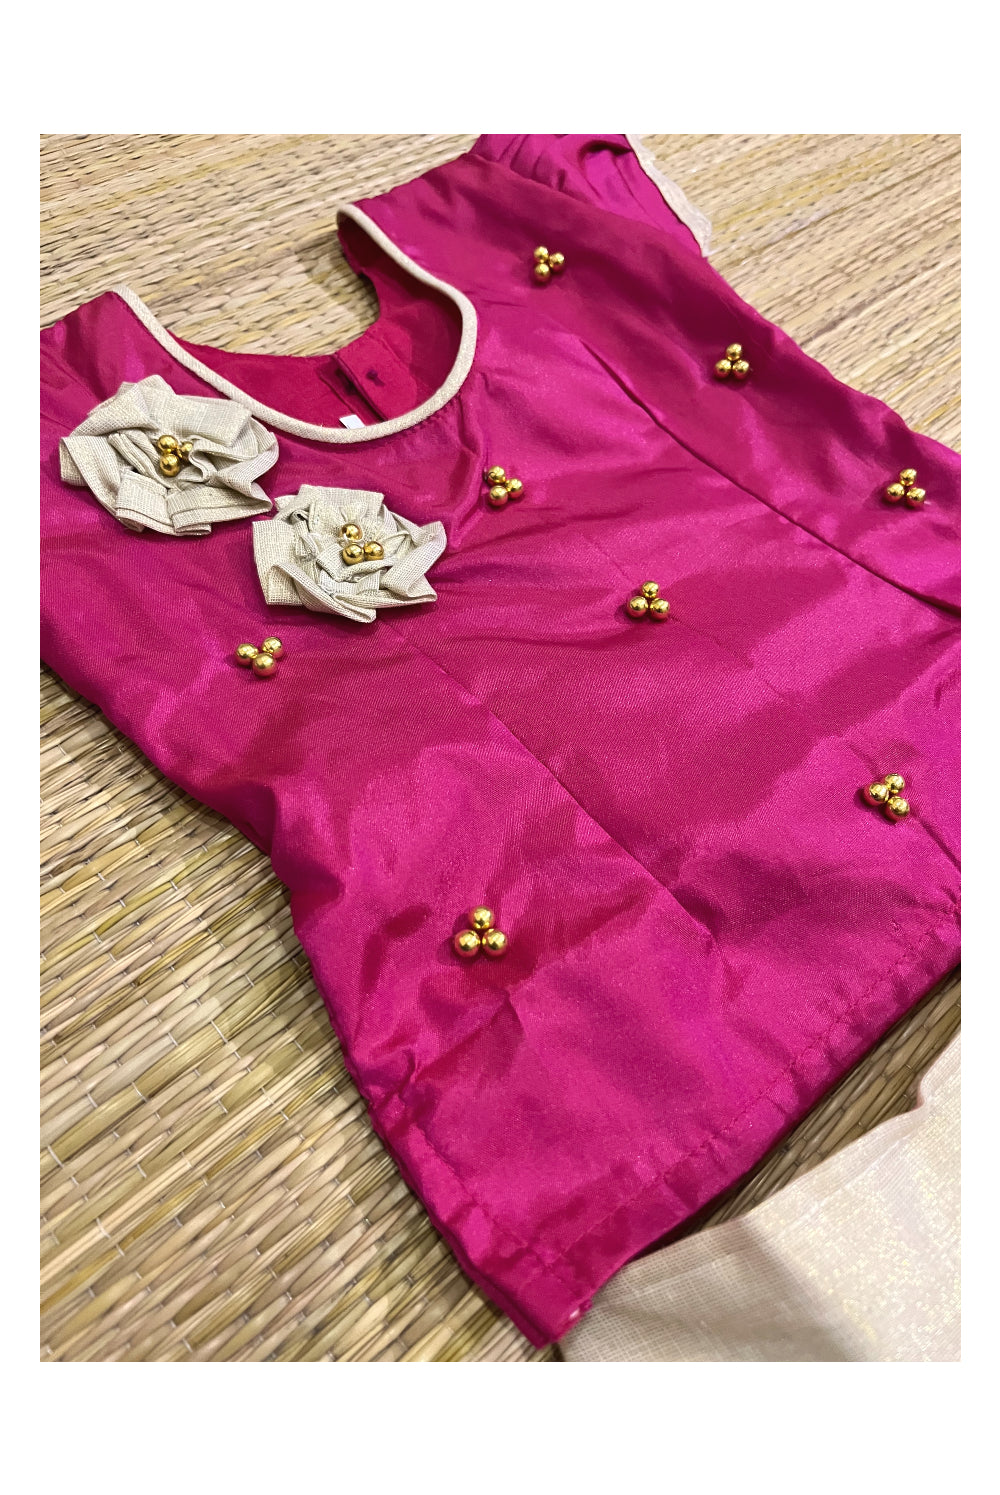 Southloom Kerala Pink Pavada Blouse with Bead Work for Kids (Age 1 - 10)